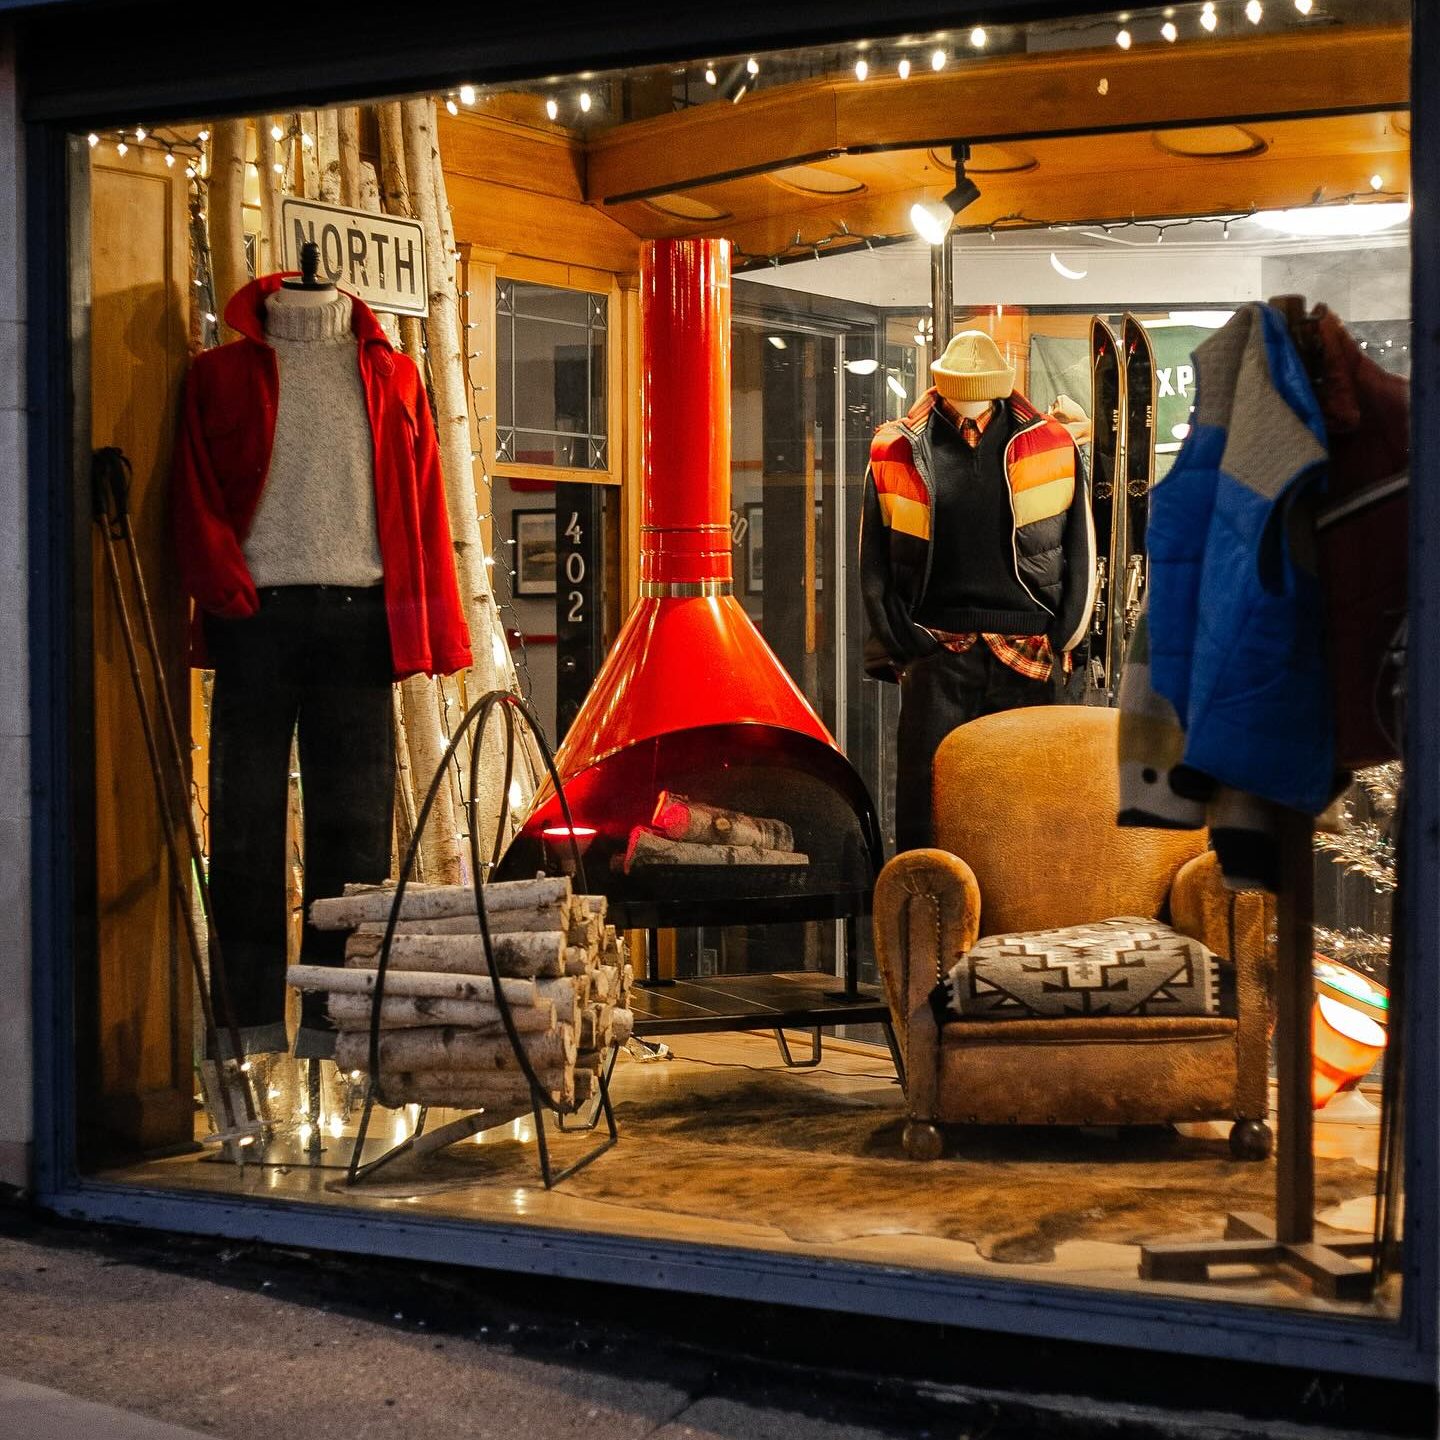 A window display with clothing and a fireplace.